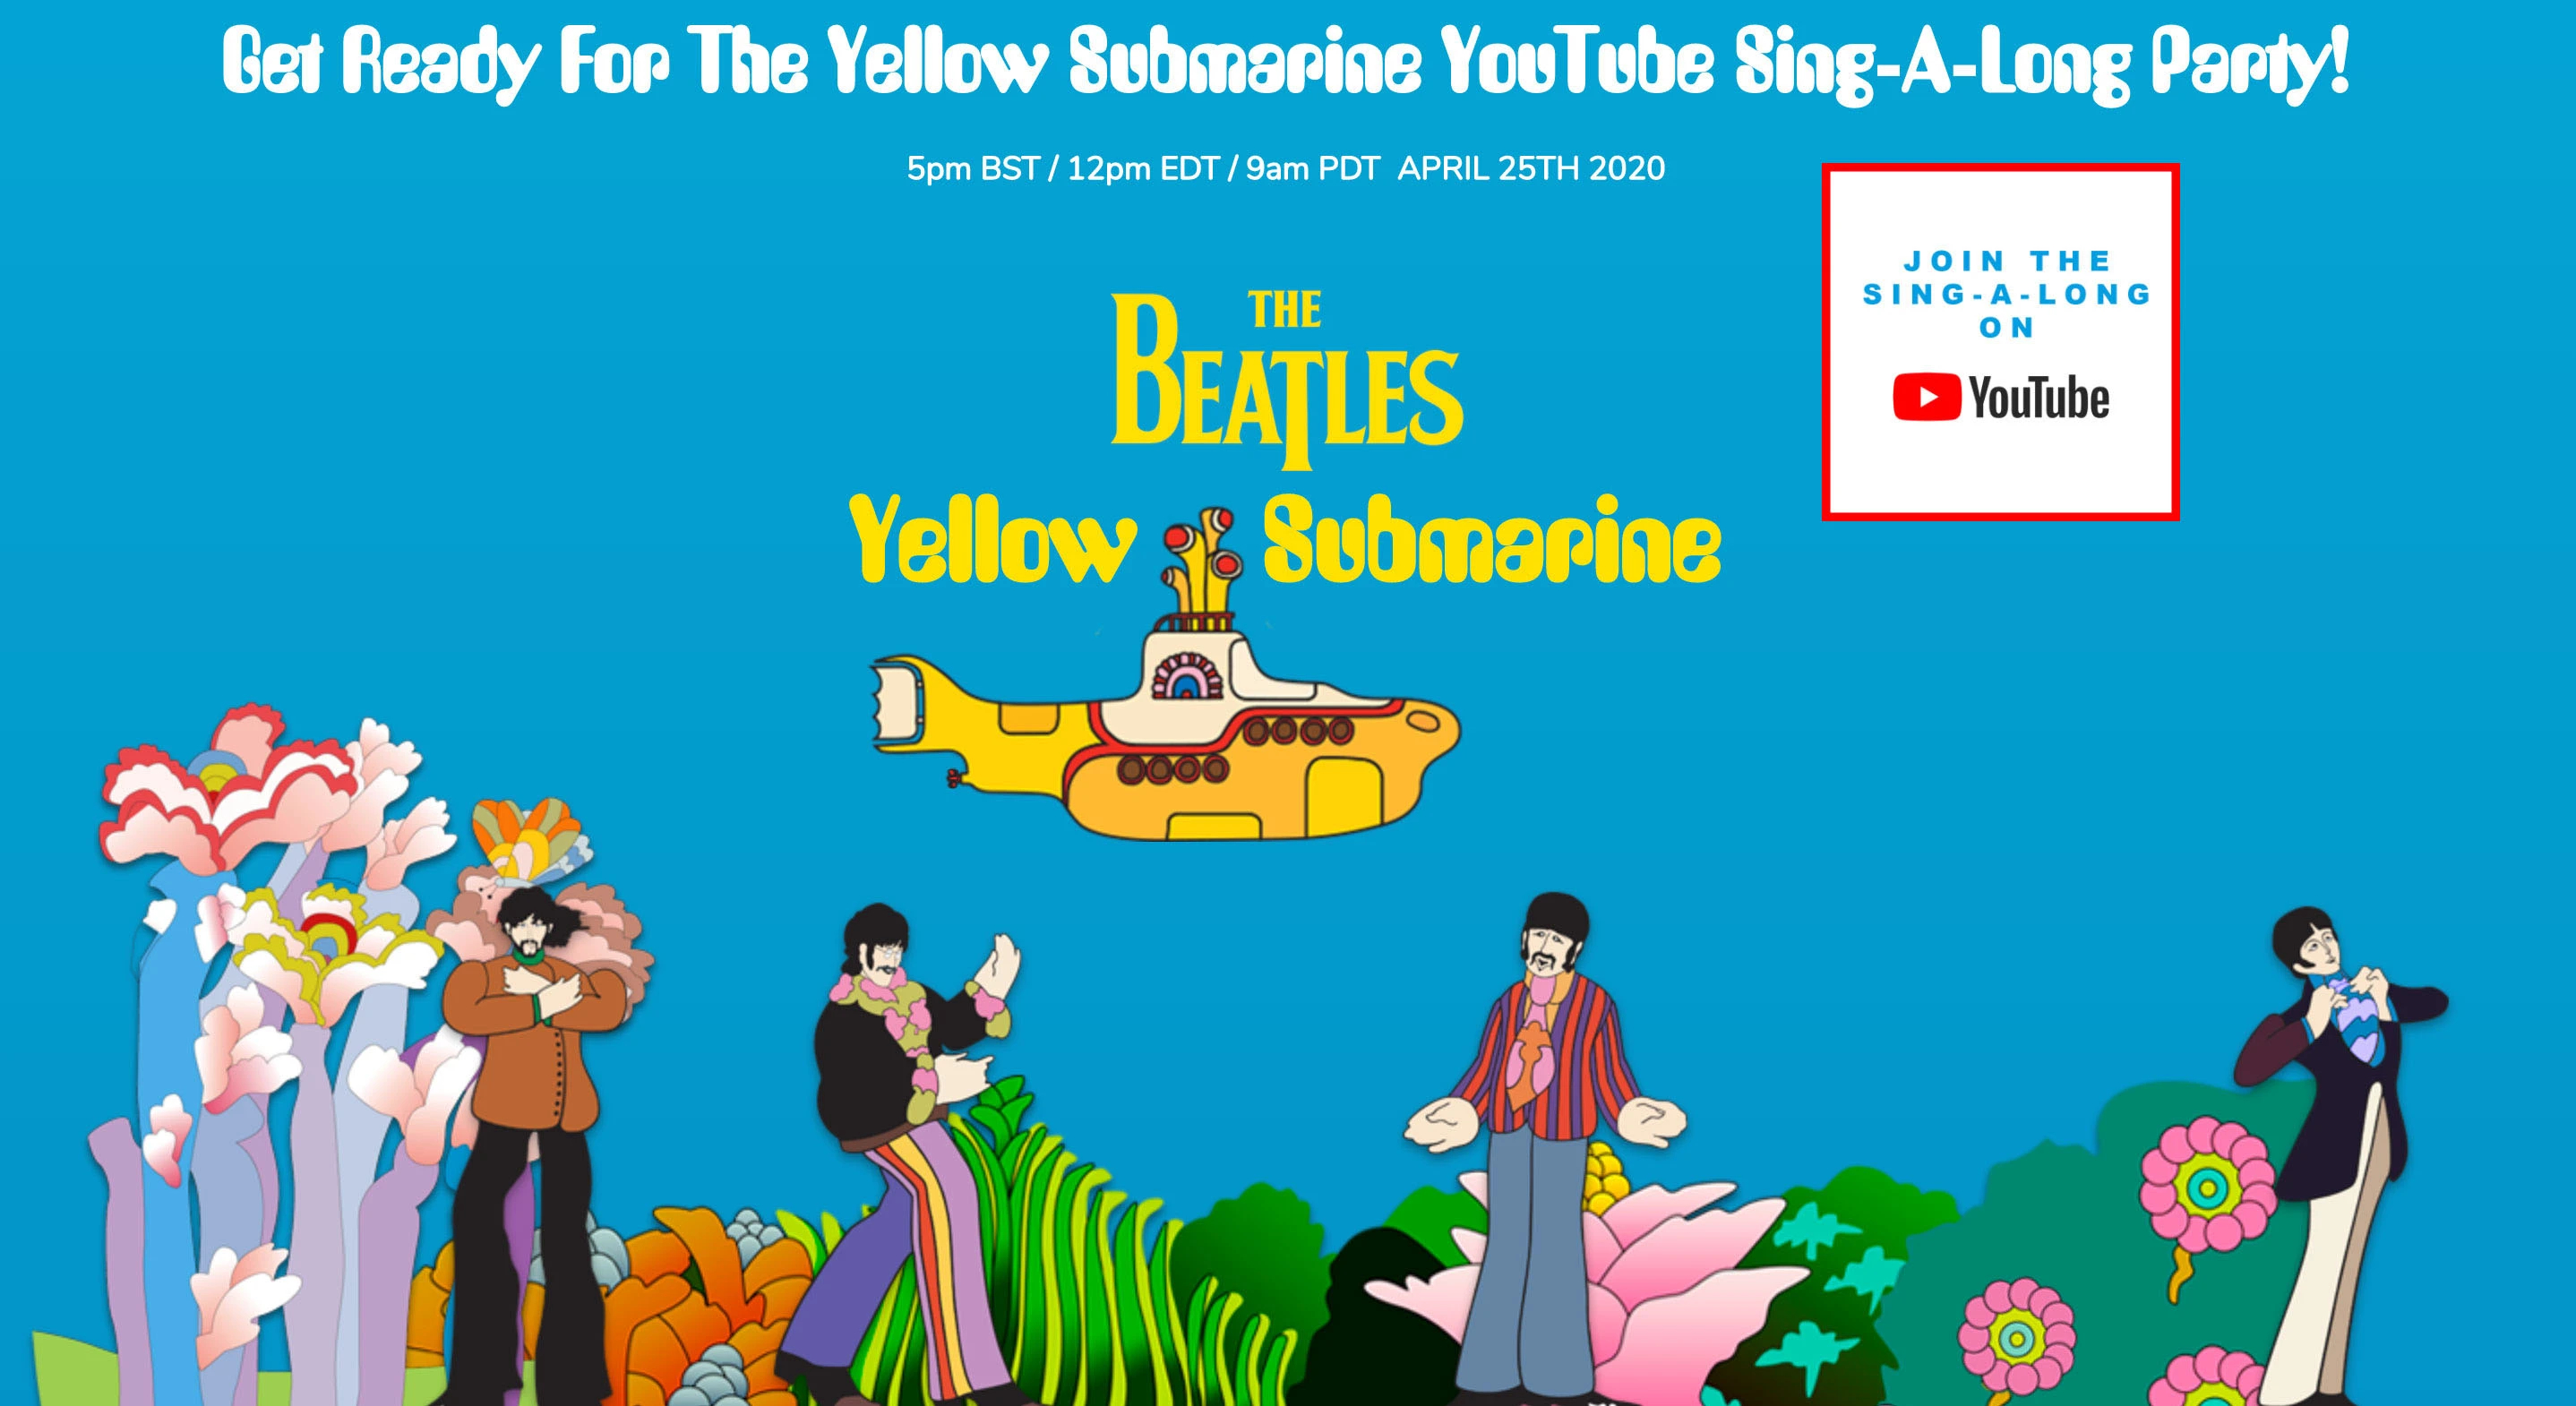 2876x1570 The Beatles will stream animated film 'Yellow Submarine' Saturday, host sing-a-long watch party | FOX 4 Kansas City WDAF-TV | News, Weather, Sports